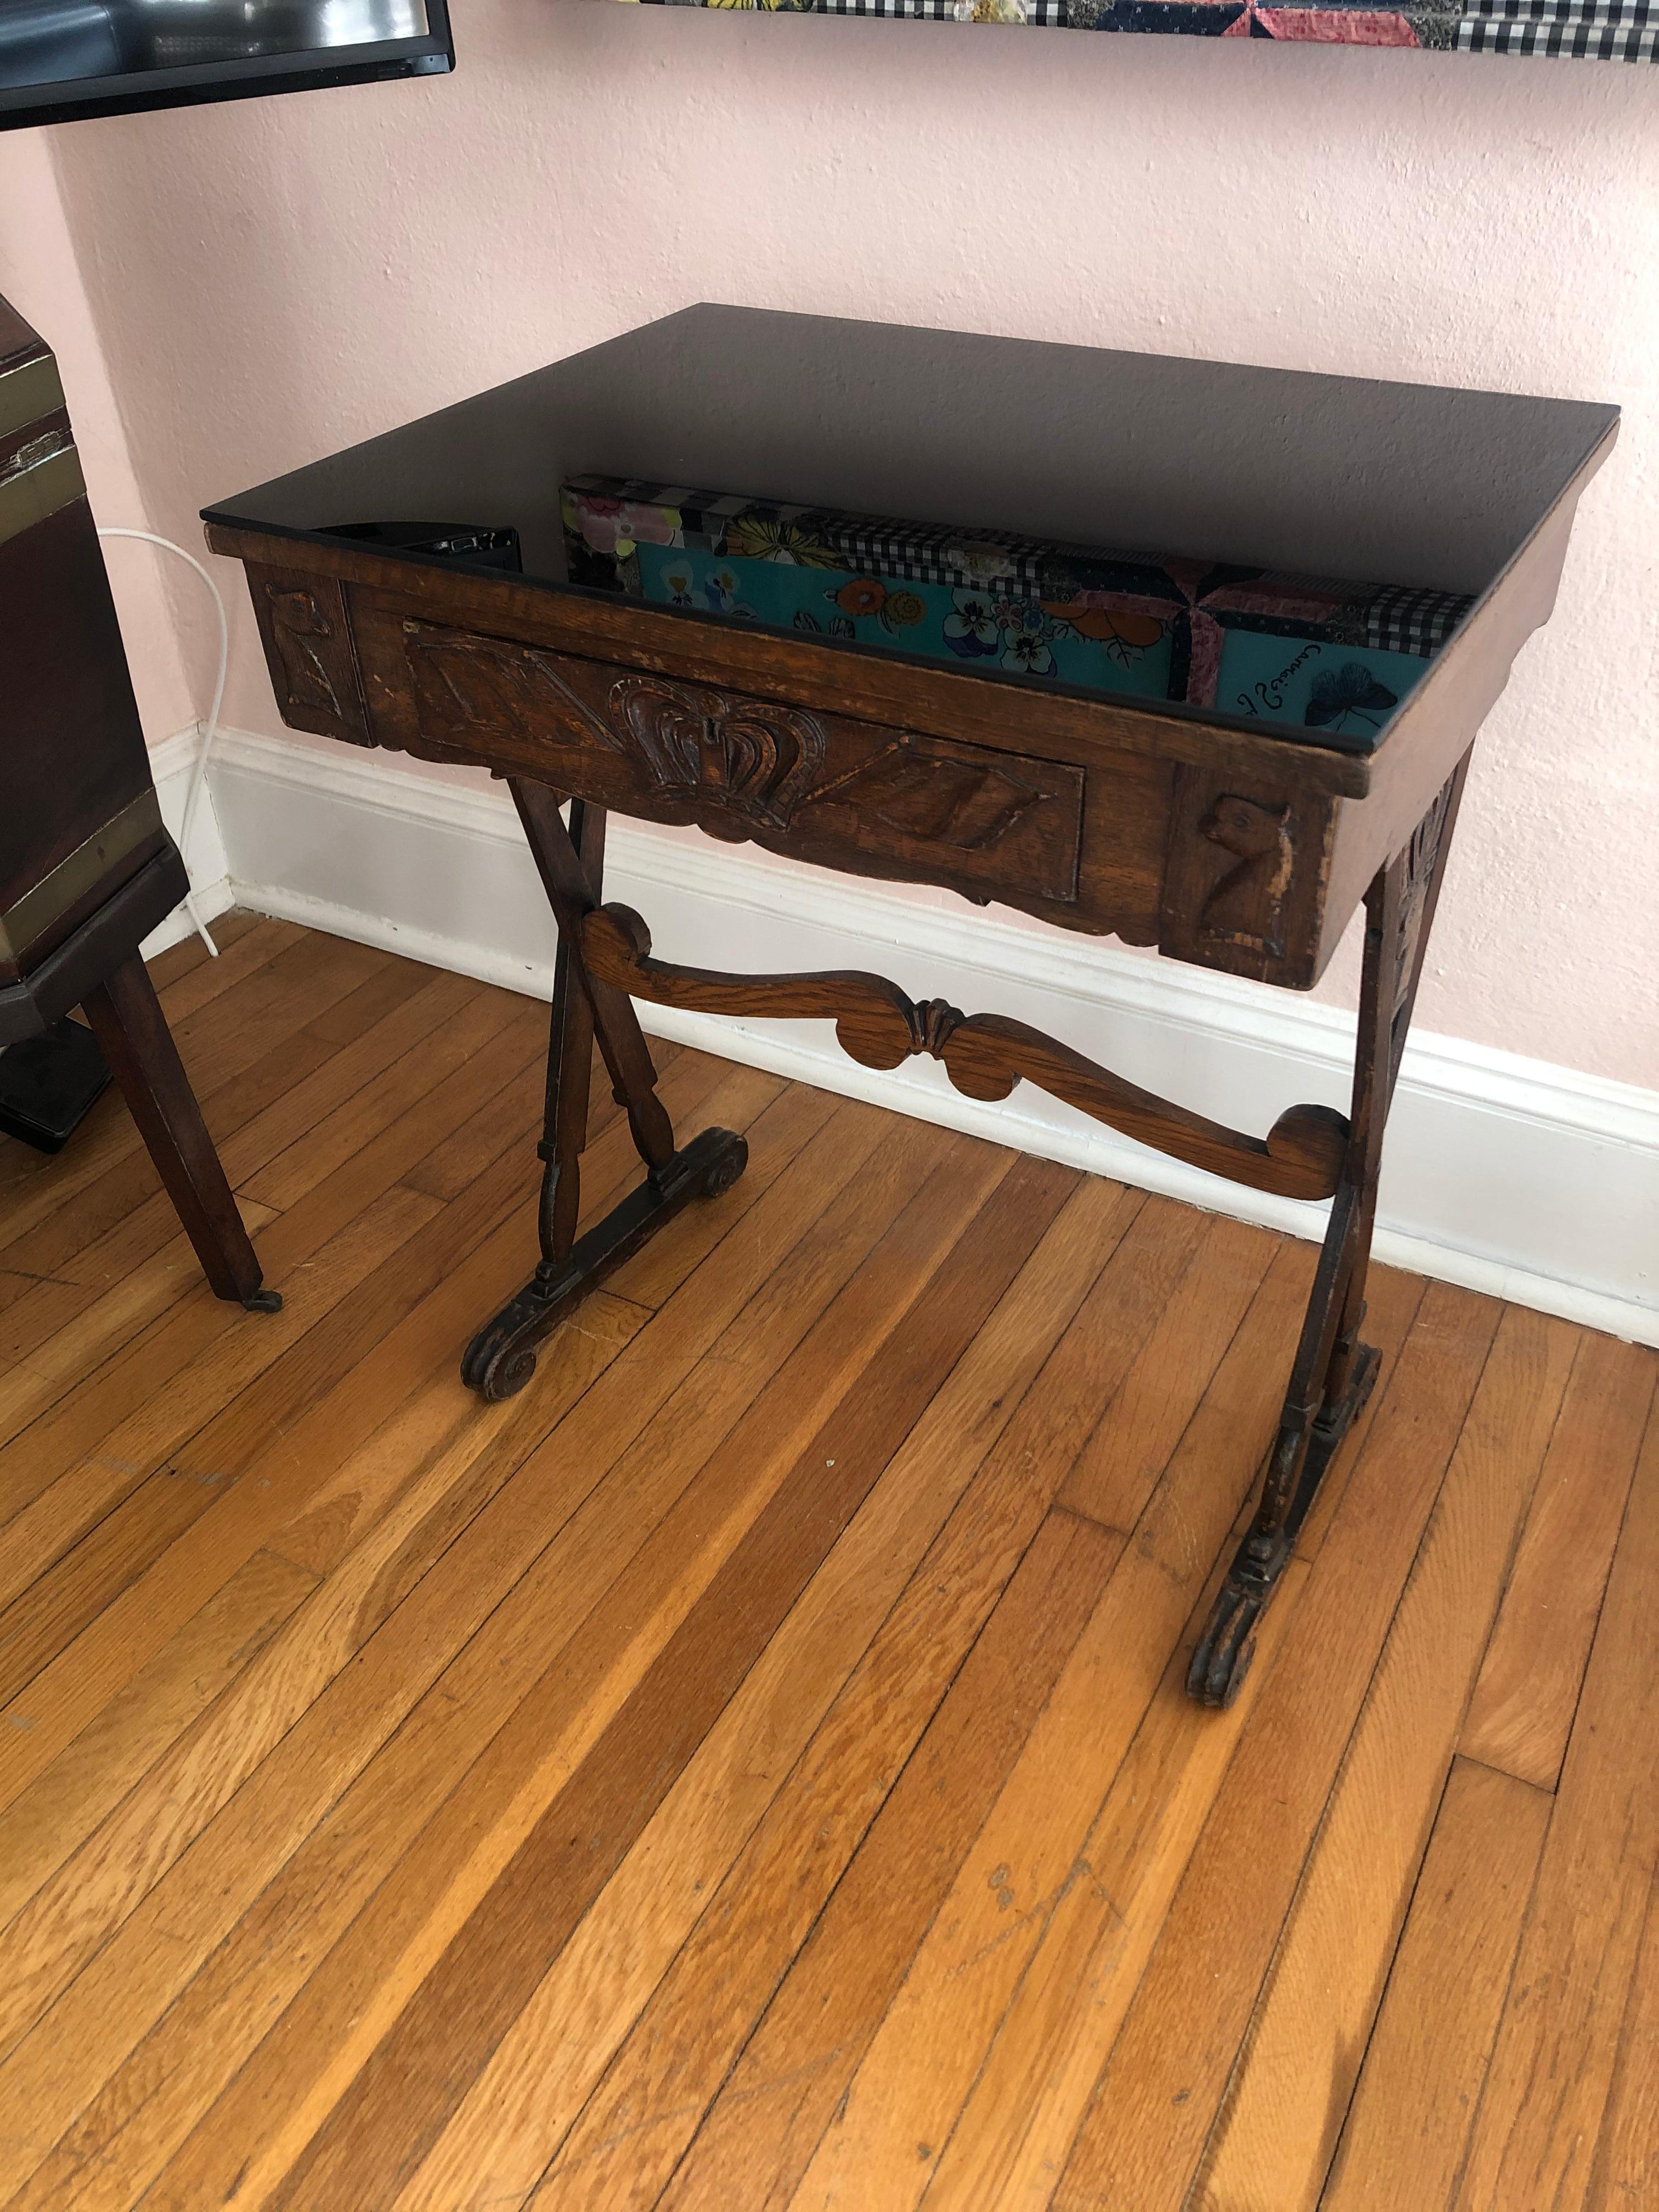 A masculine wonderfully weathered carved oak end table having single drawer with crown decoration and two animal motife heads that look like chess pieces on either side, as well as handsome X motife legs also decorated with crowns. Top has a